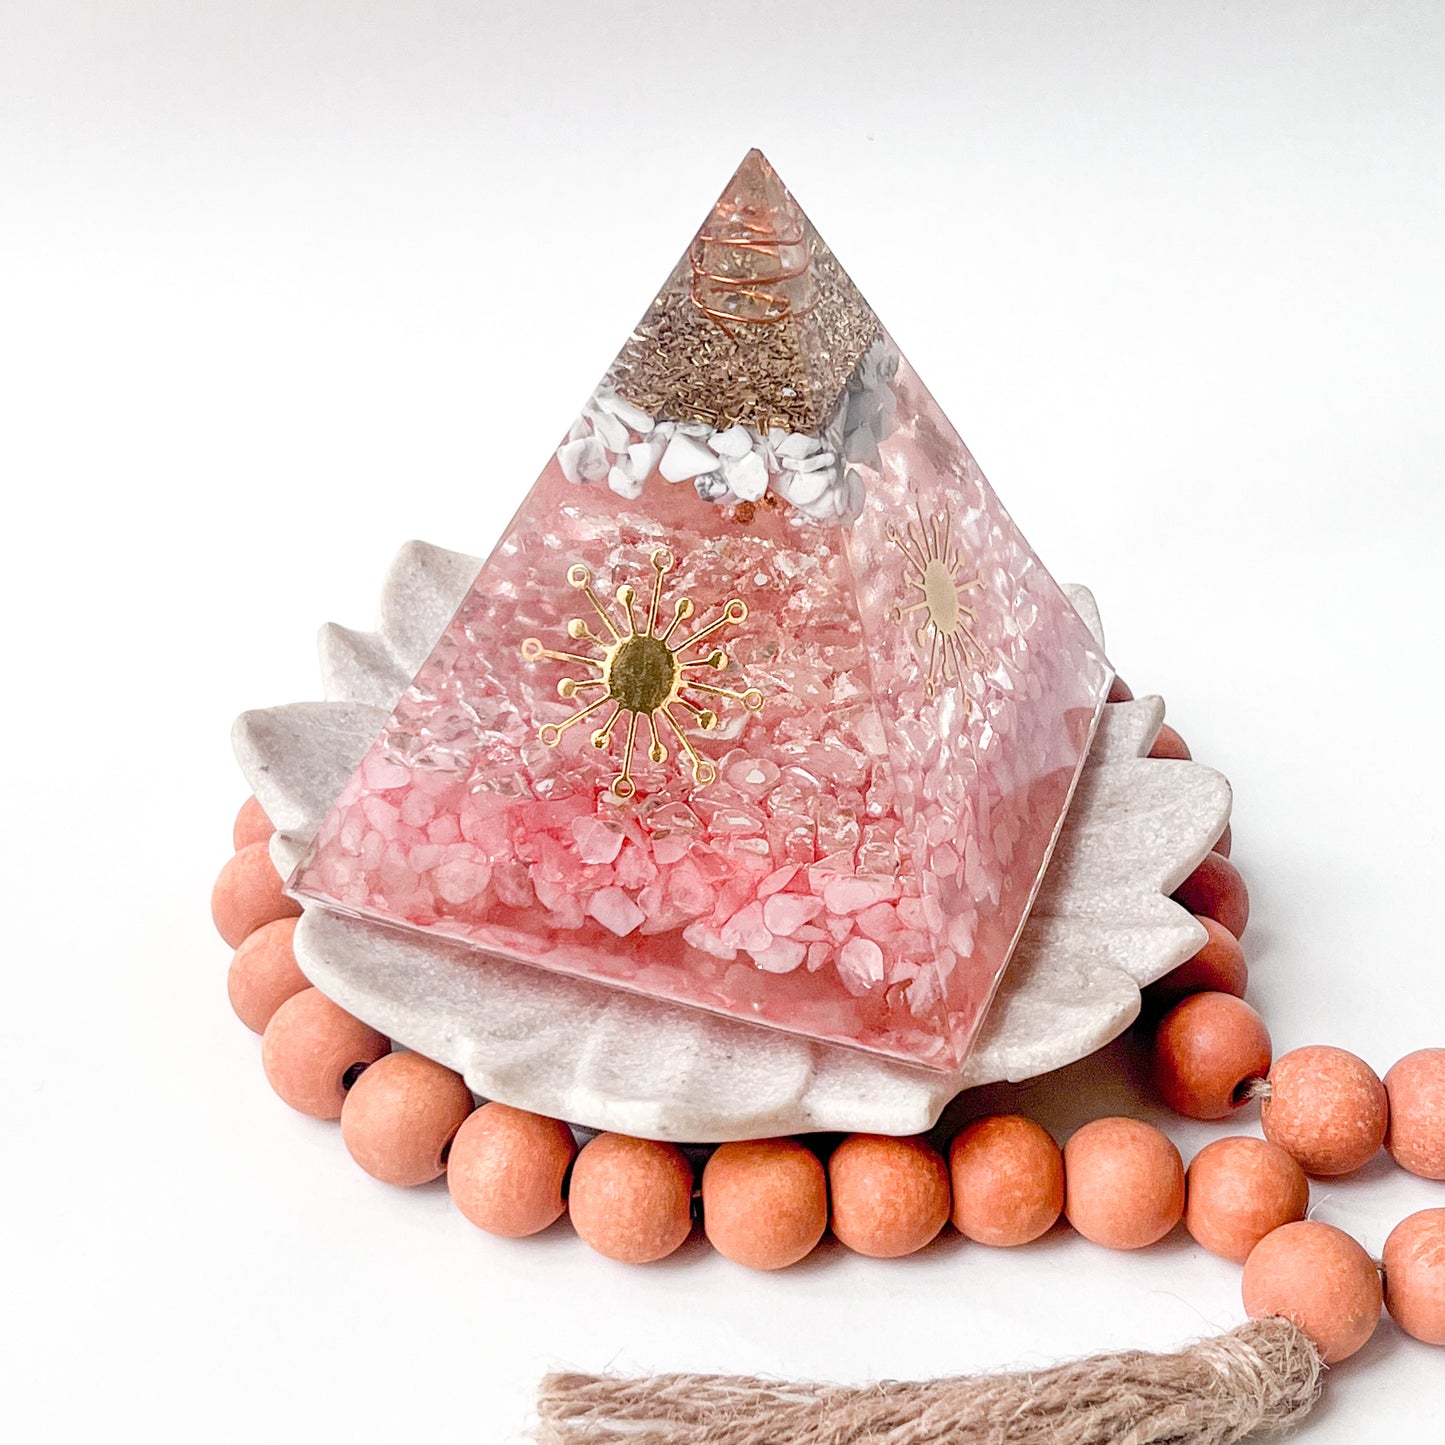 Unique orgonite pyramid with copper coil and crystal for amplifying your intentions